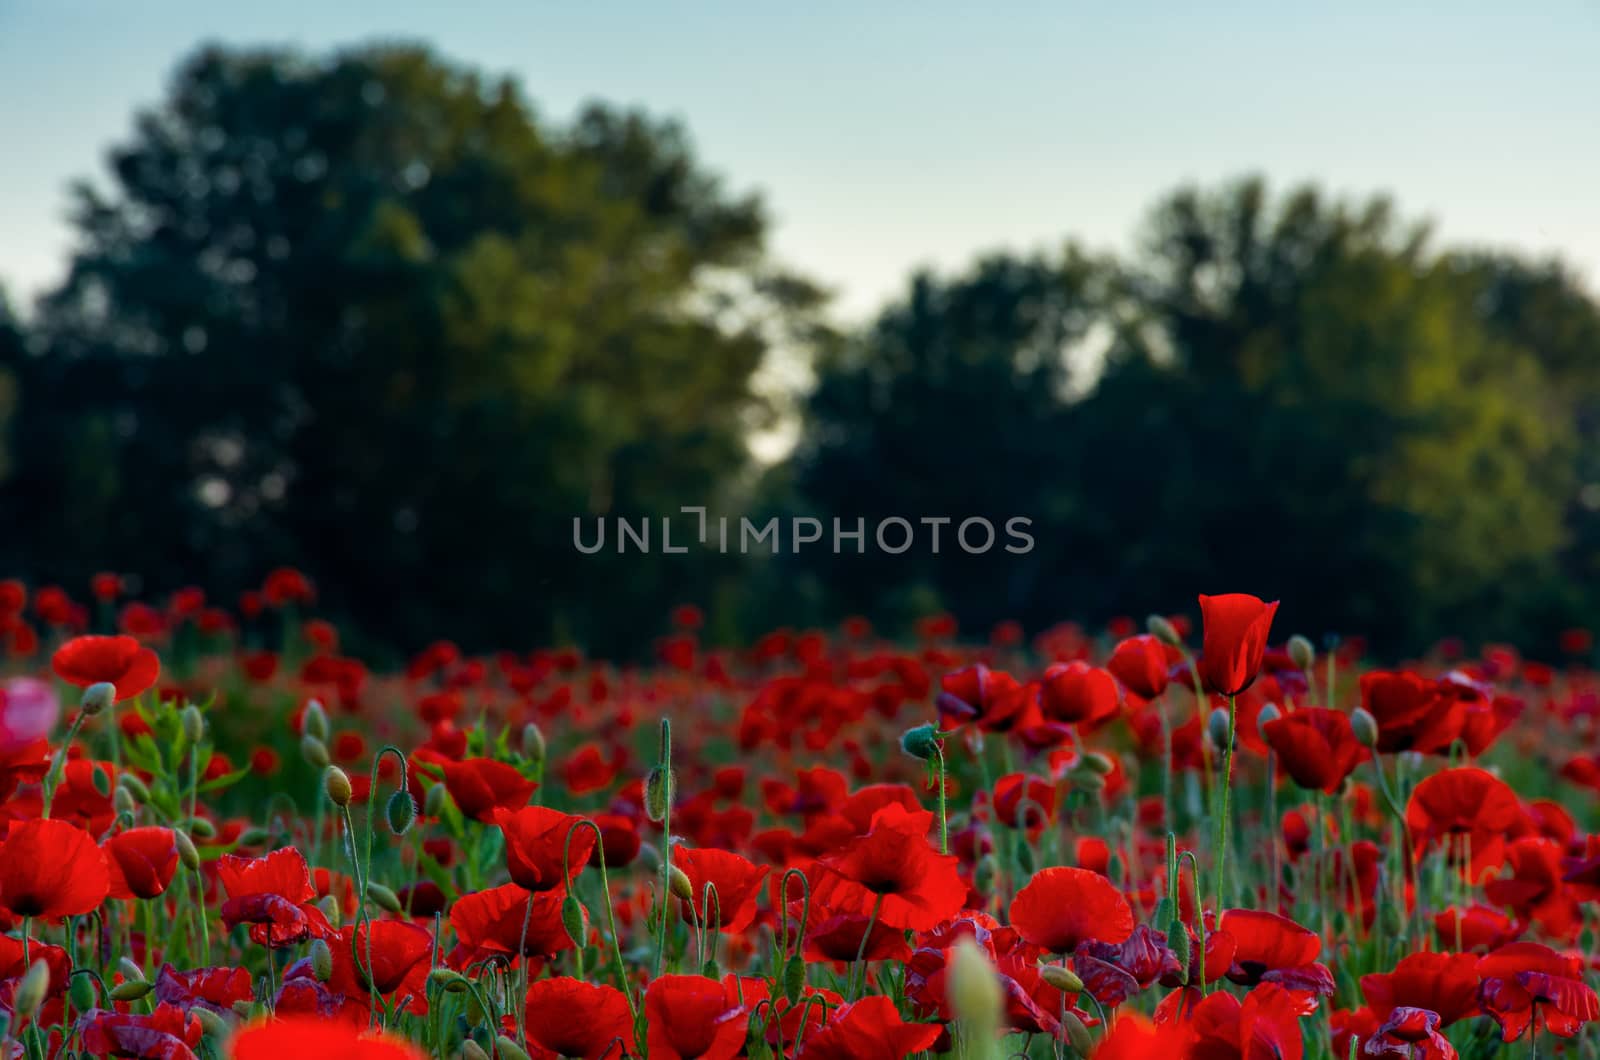 forest behind the poppy field by Pellinni